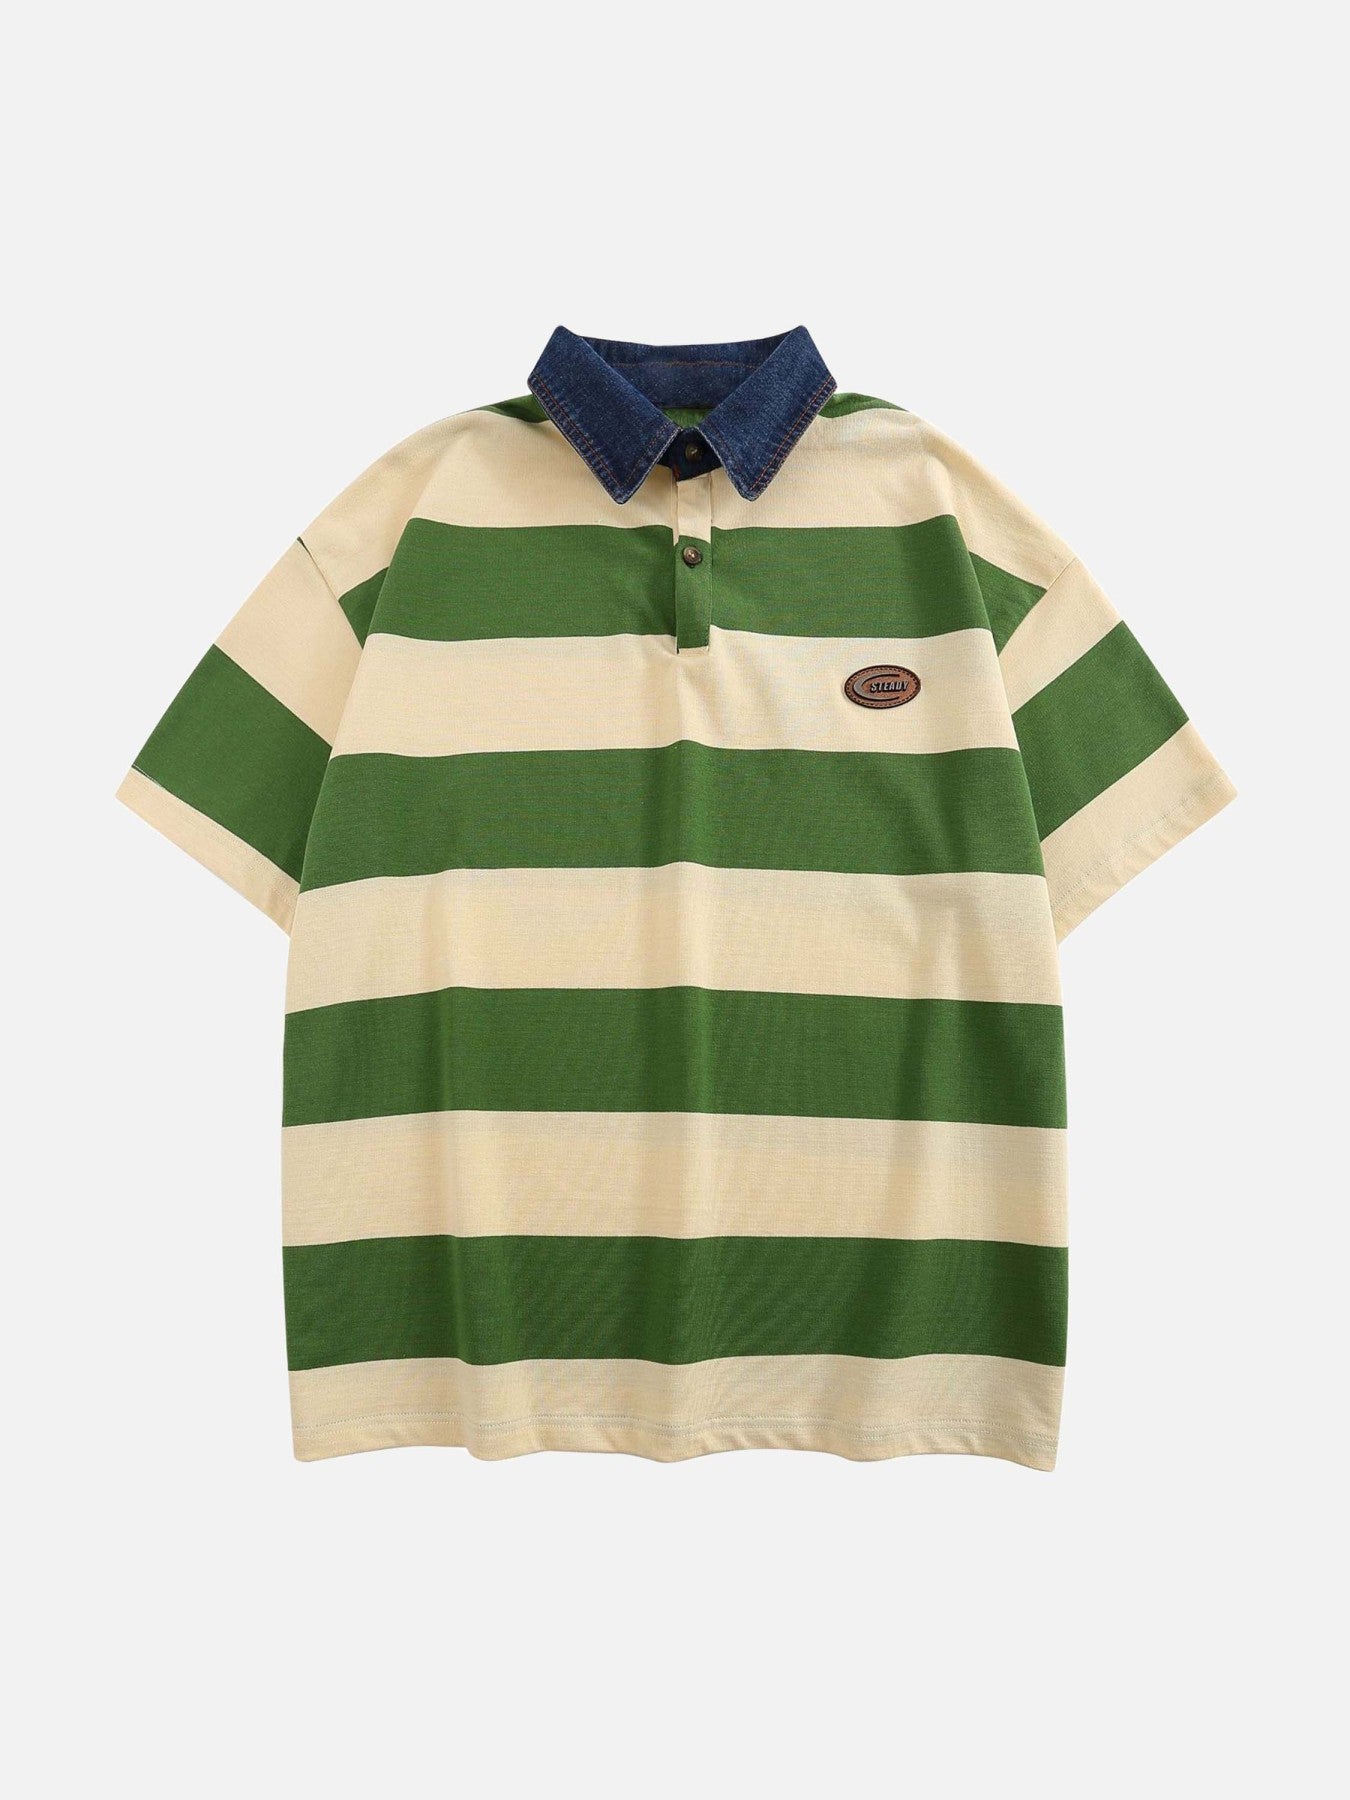 The Supermade Vintage Color Striped Polo Shirt